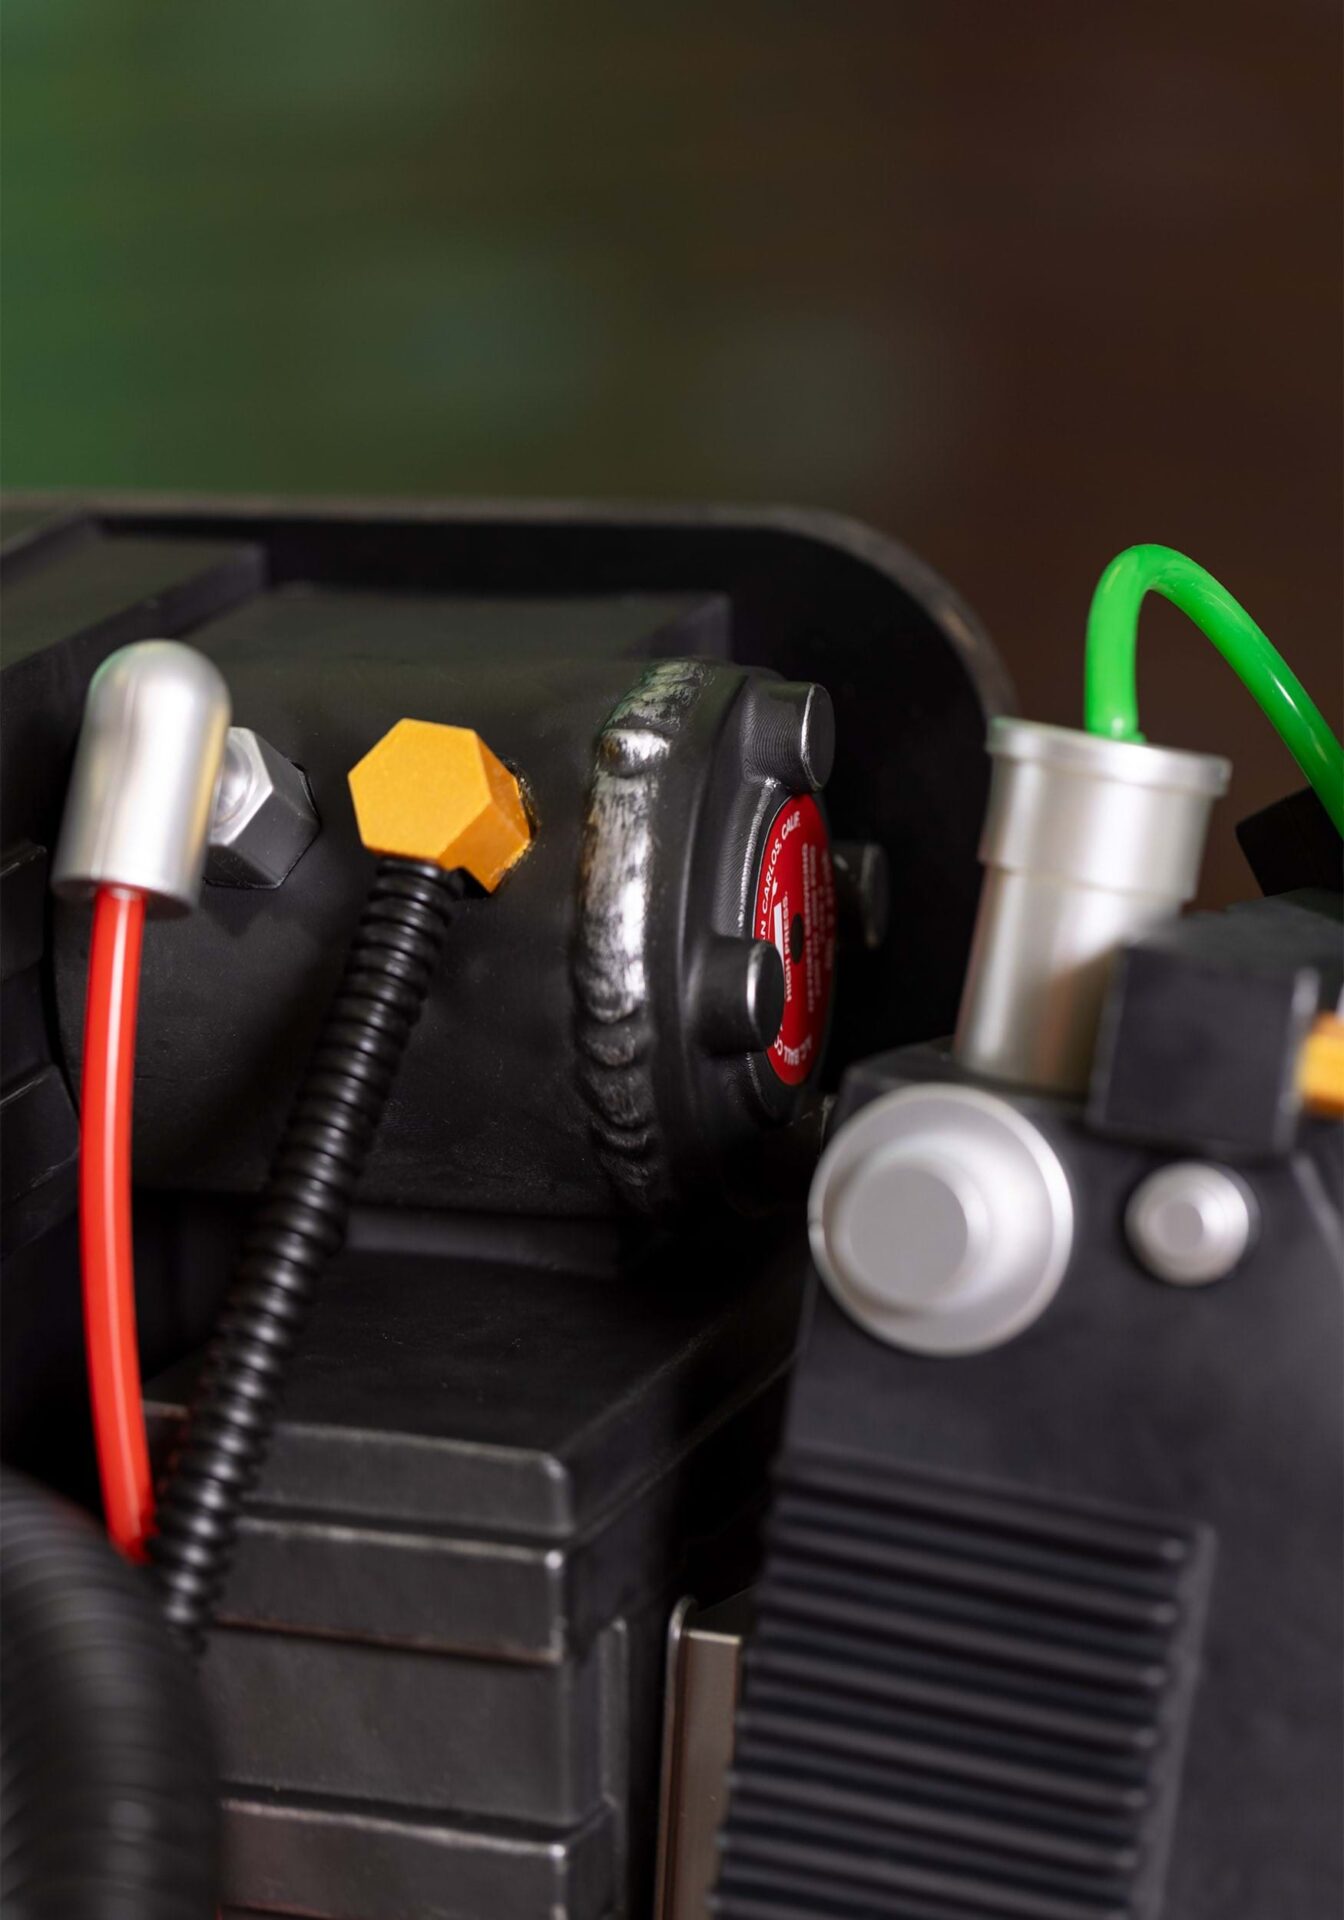 Ghostbusters Proton Pack connectors